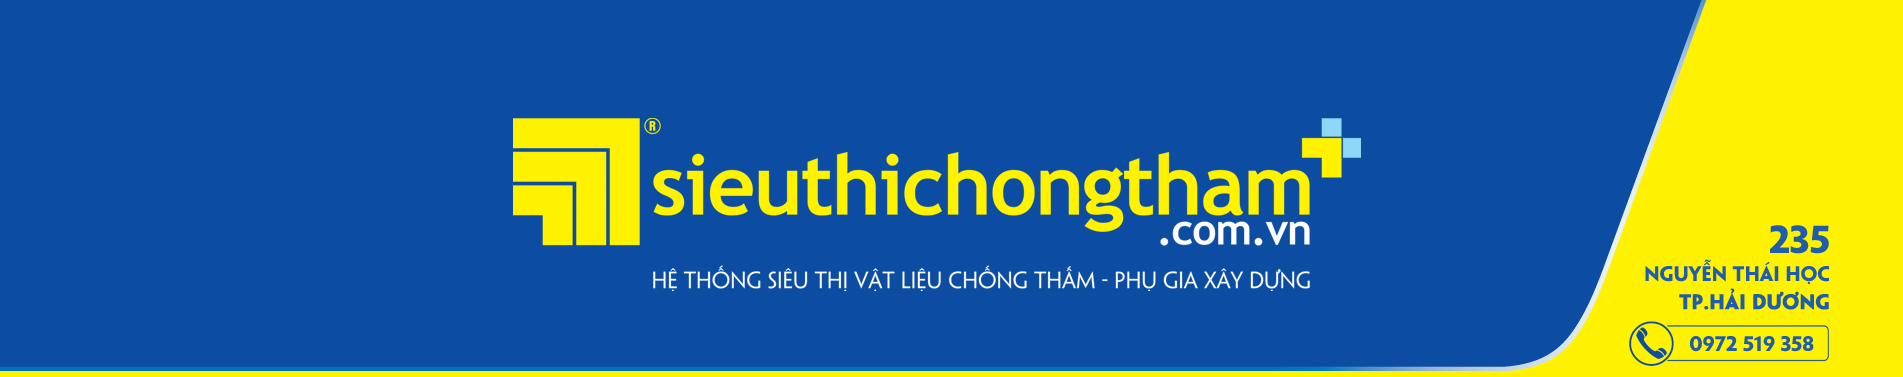 Trung Anh Banner 1